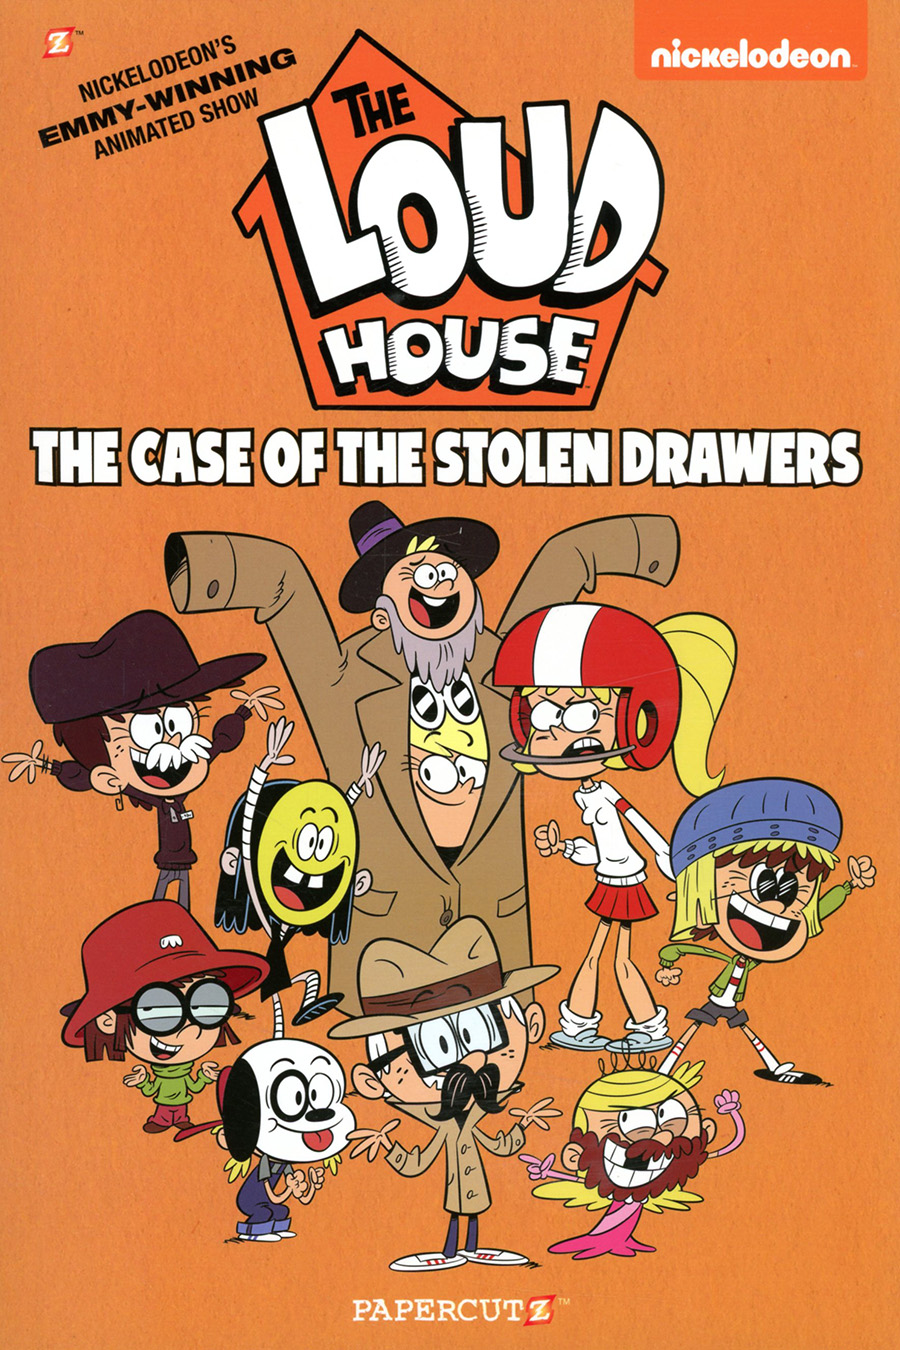 Loud House Vol 12 Case Of The Stolen Drawers TP